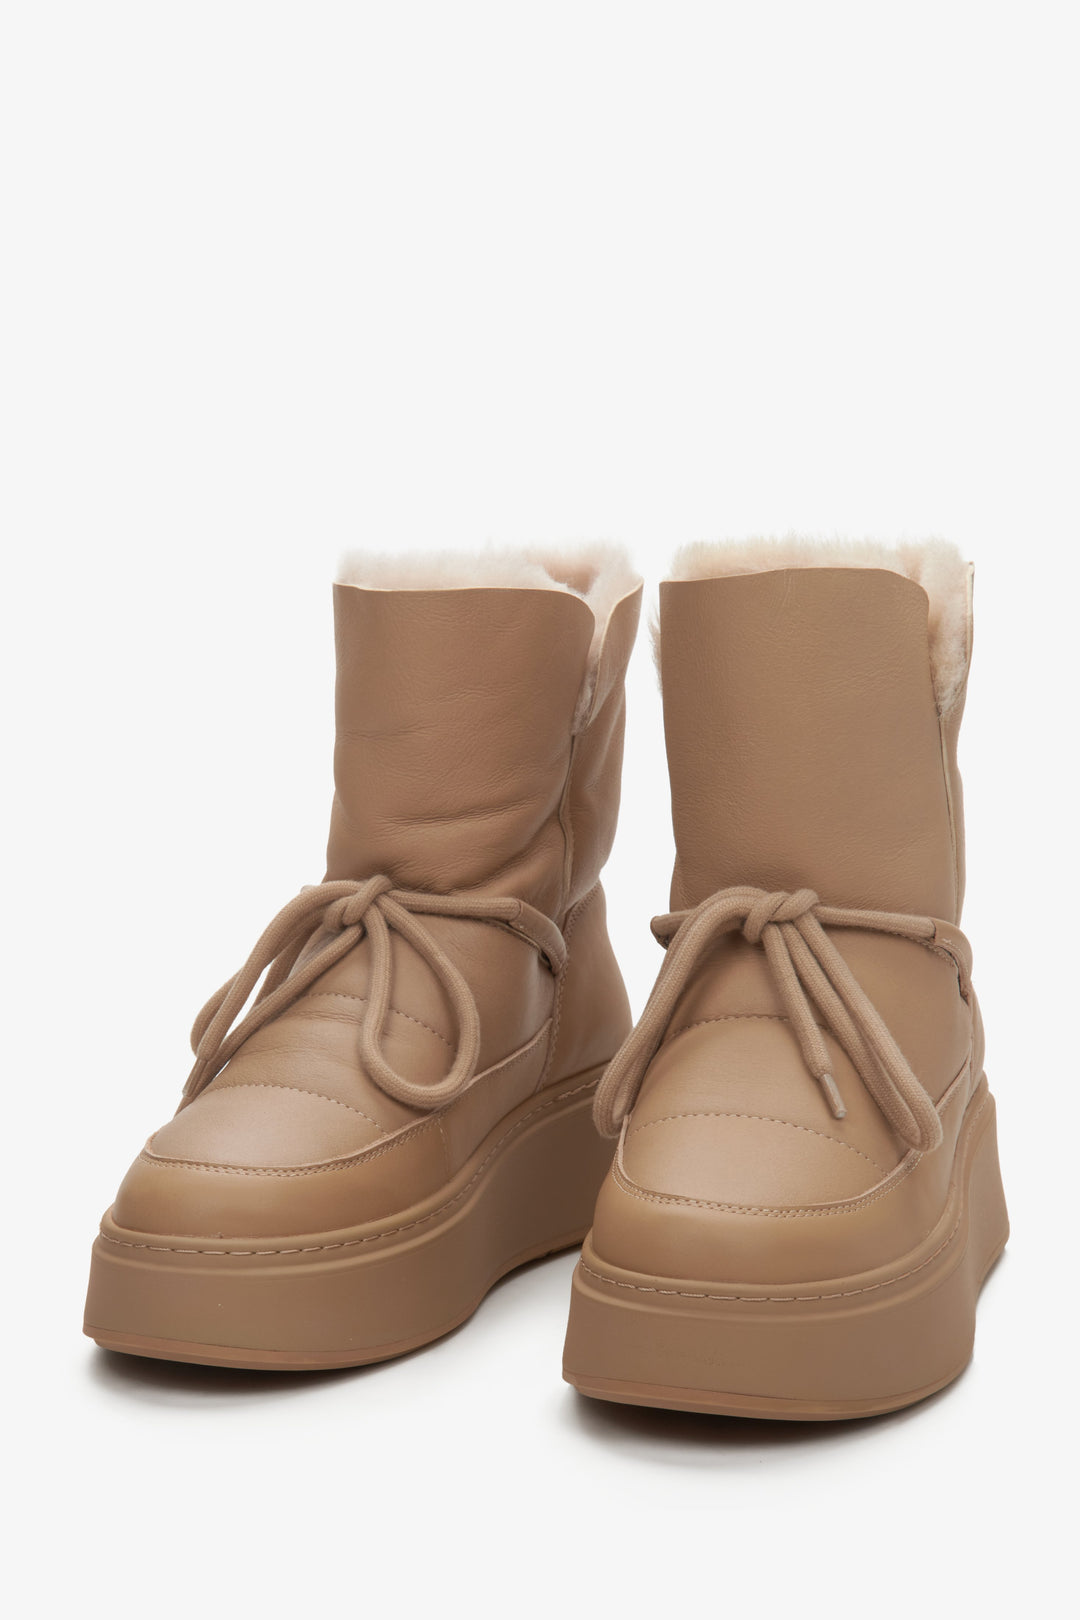 Women's brown leather snow boots Estro - a cloes-up at the tip of the toe.